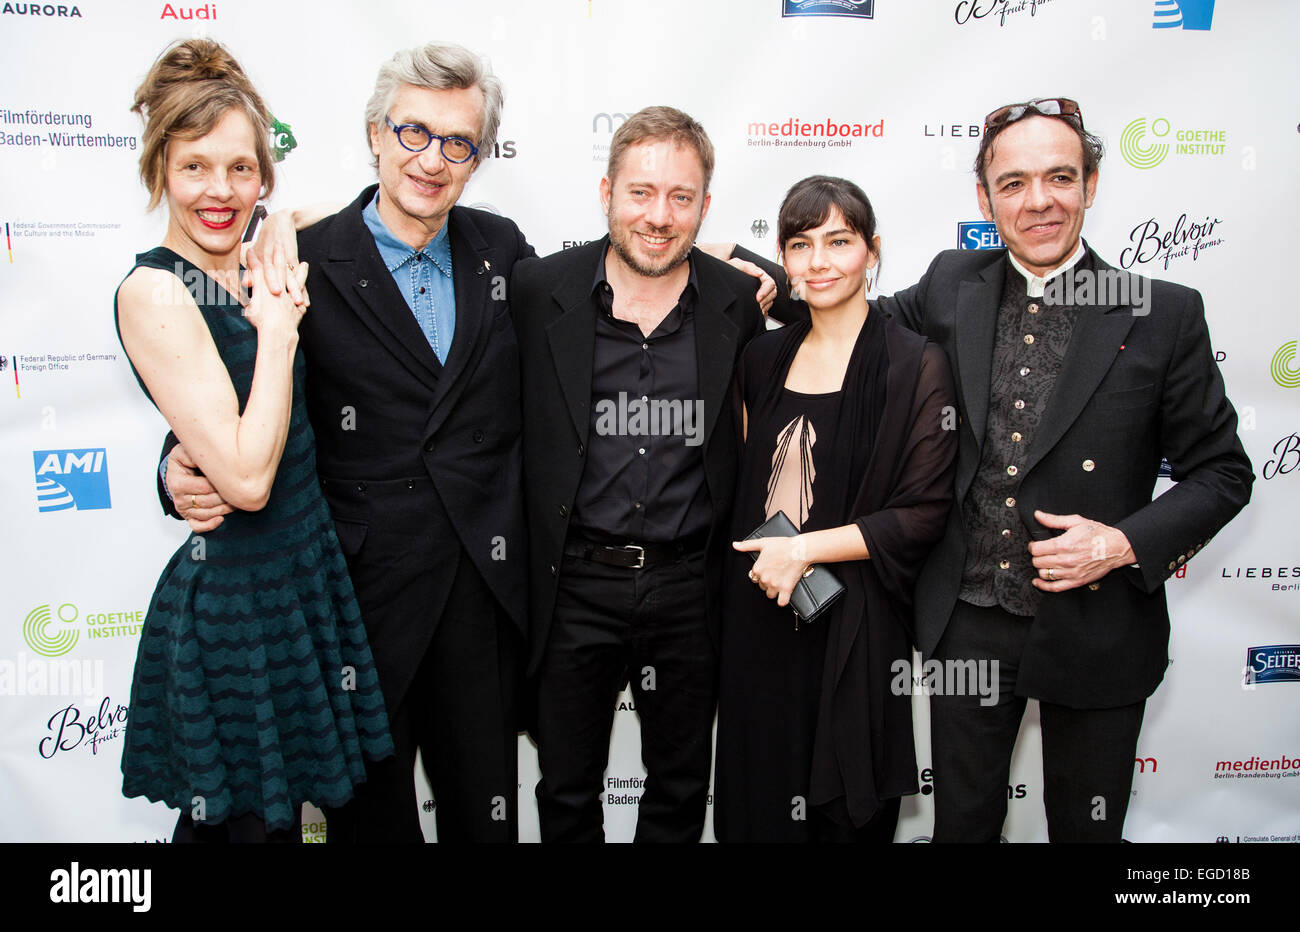 Juliano Ribeiro Salgado, Ivi Roberg, Laurent Petitgand, Wim Wenders and Donata Wenders at the German Films and the Consulate General of the Federal Republic Of Germany's German Oscar nominees reception held at Villa Aurora in Pacific Palisades on February 21, 2015. Credit: Flaminia Fanale/Lumeimages.com Stock Photo